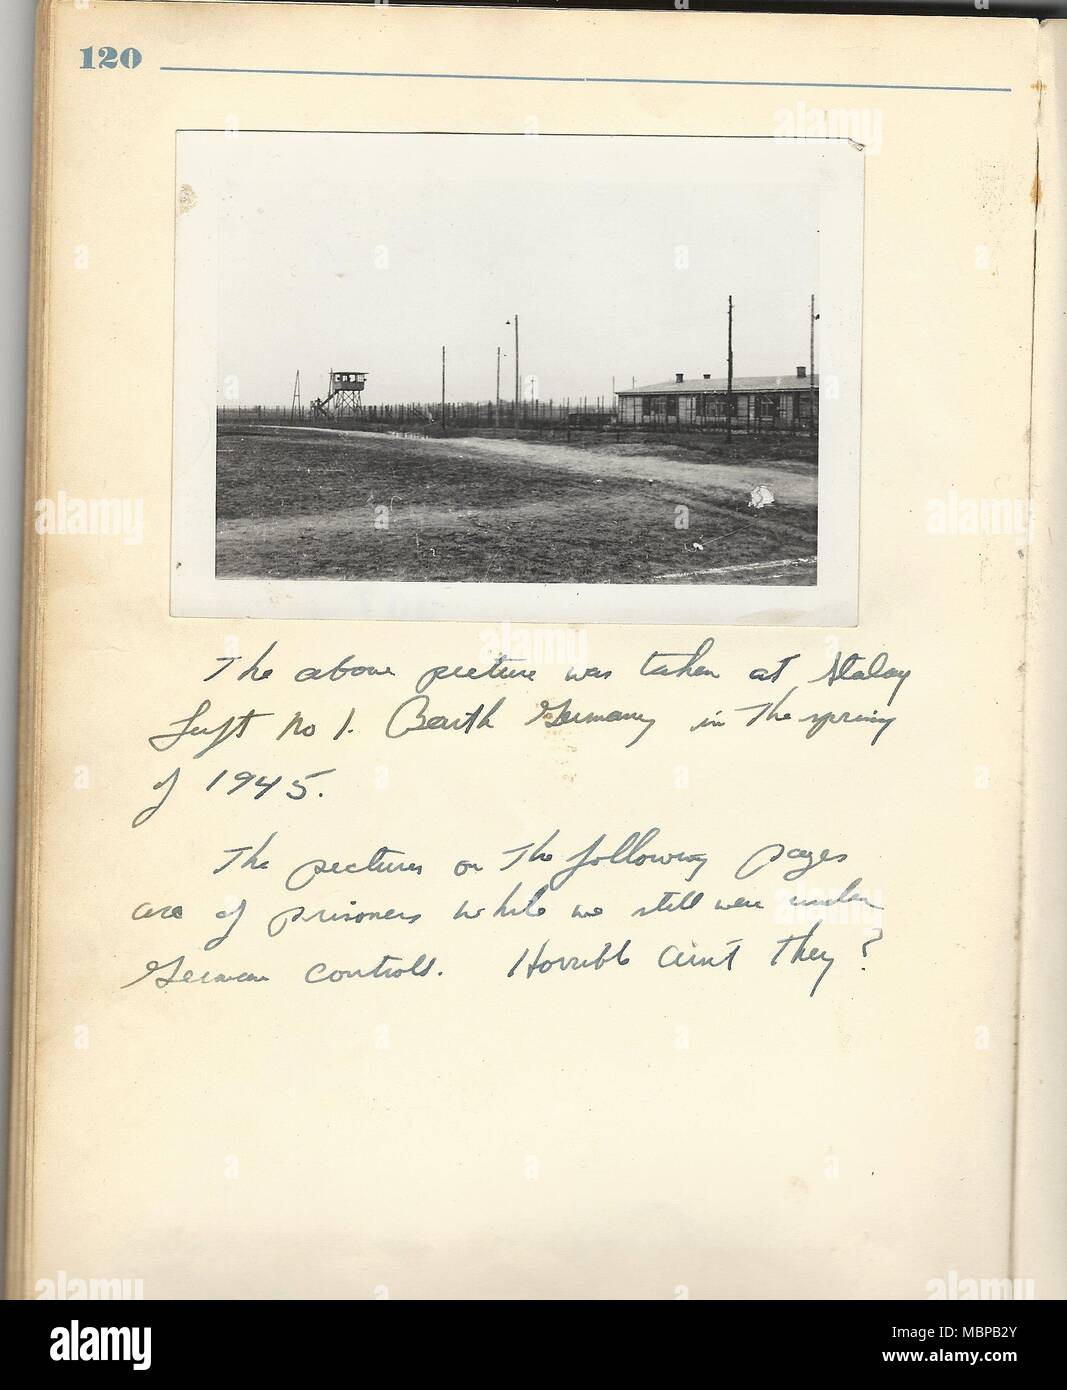 A photo of Stalag Luft 1, Barth, Germany, where 1st. Lt. Bill Moore, a fighter pilot assigned to the 339th Fighter Group, was held for nine months from September, 1944, to May 1945. Moore was able to convince prison camp guards to allow him a camera and writing utensils in order to document his time as a prisoner of war. (Photo courtesy of Linda Moore) Stock Photo